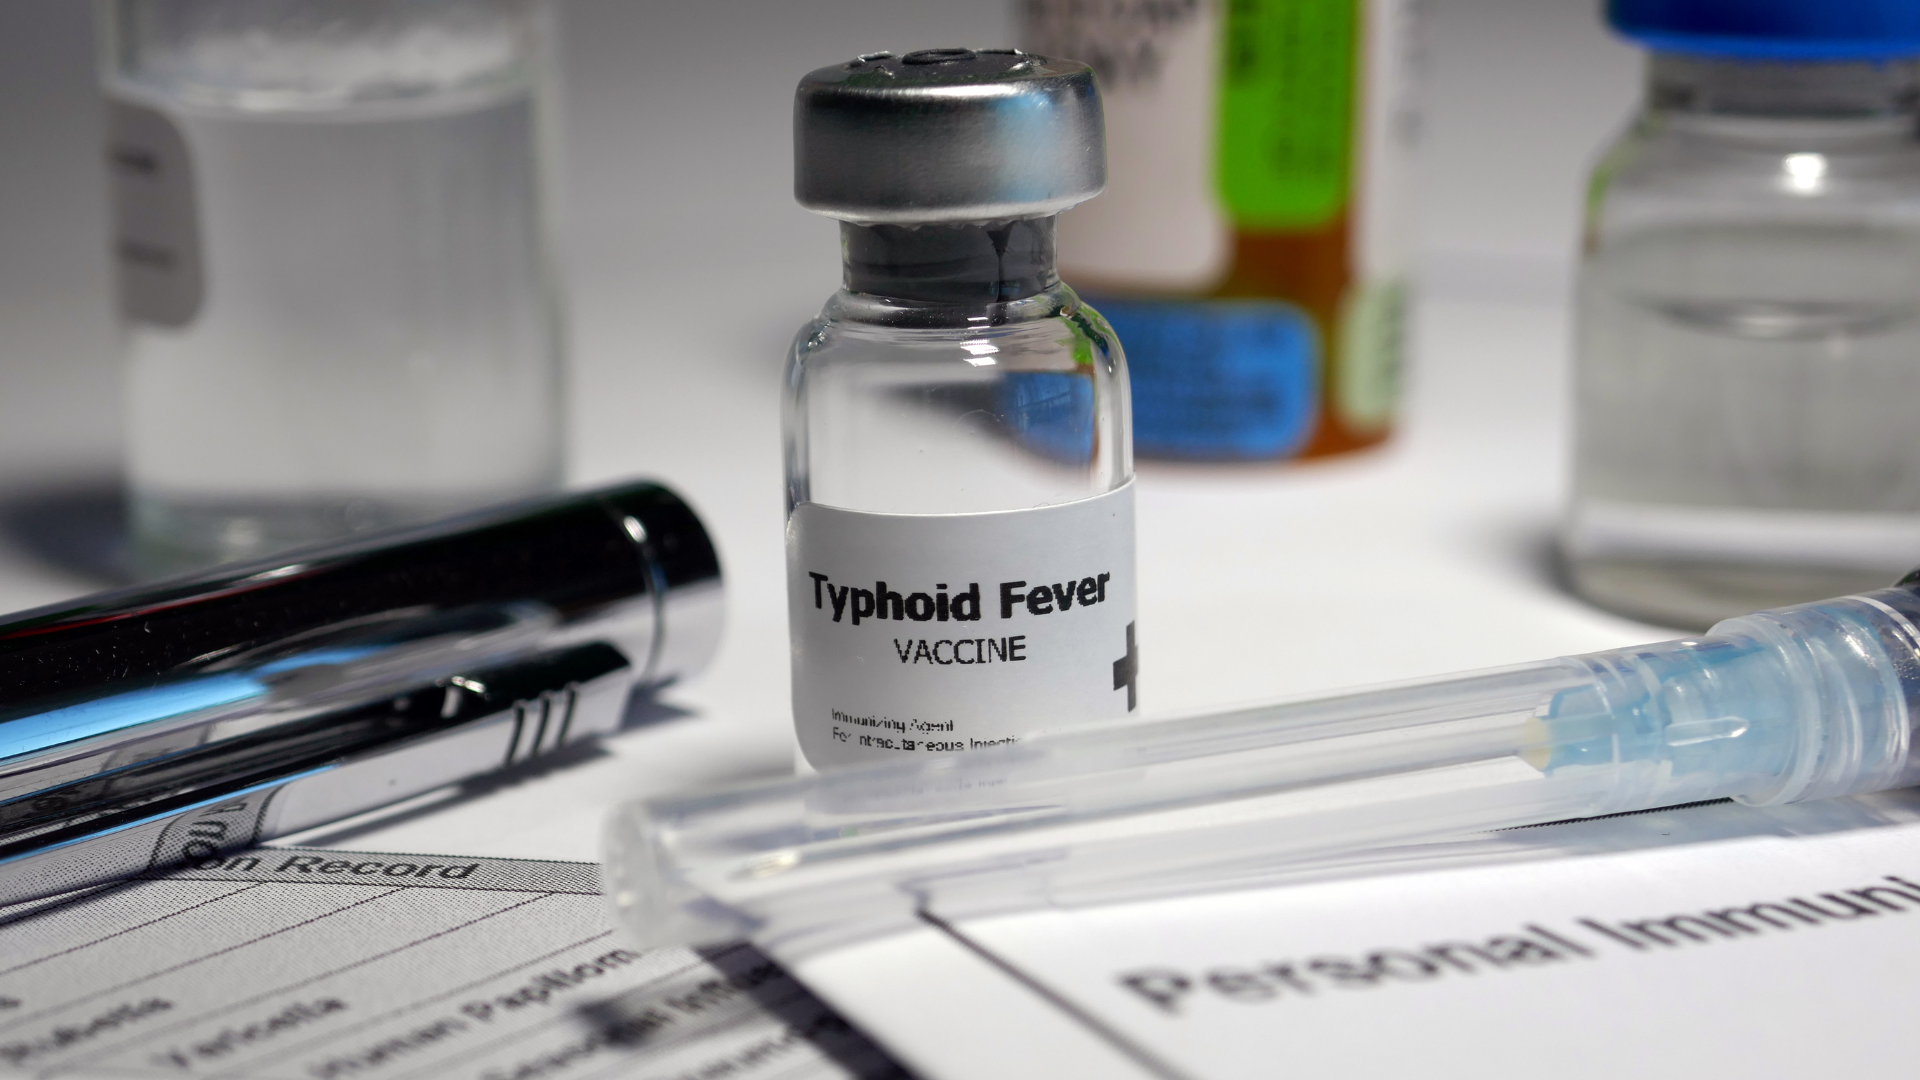 Everything you need to know about Typhoid Fever